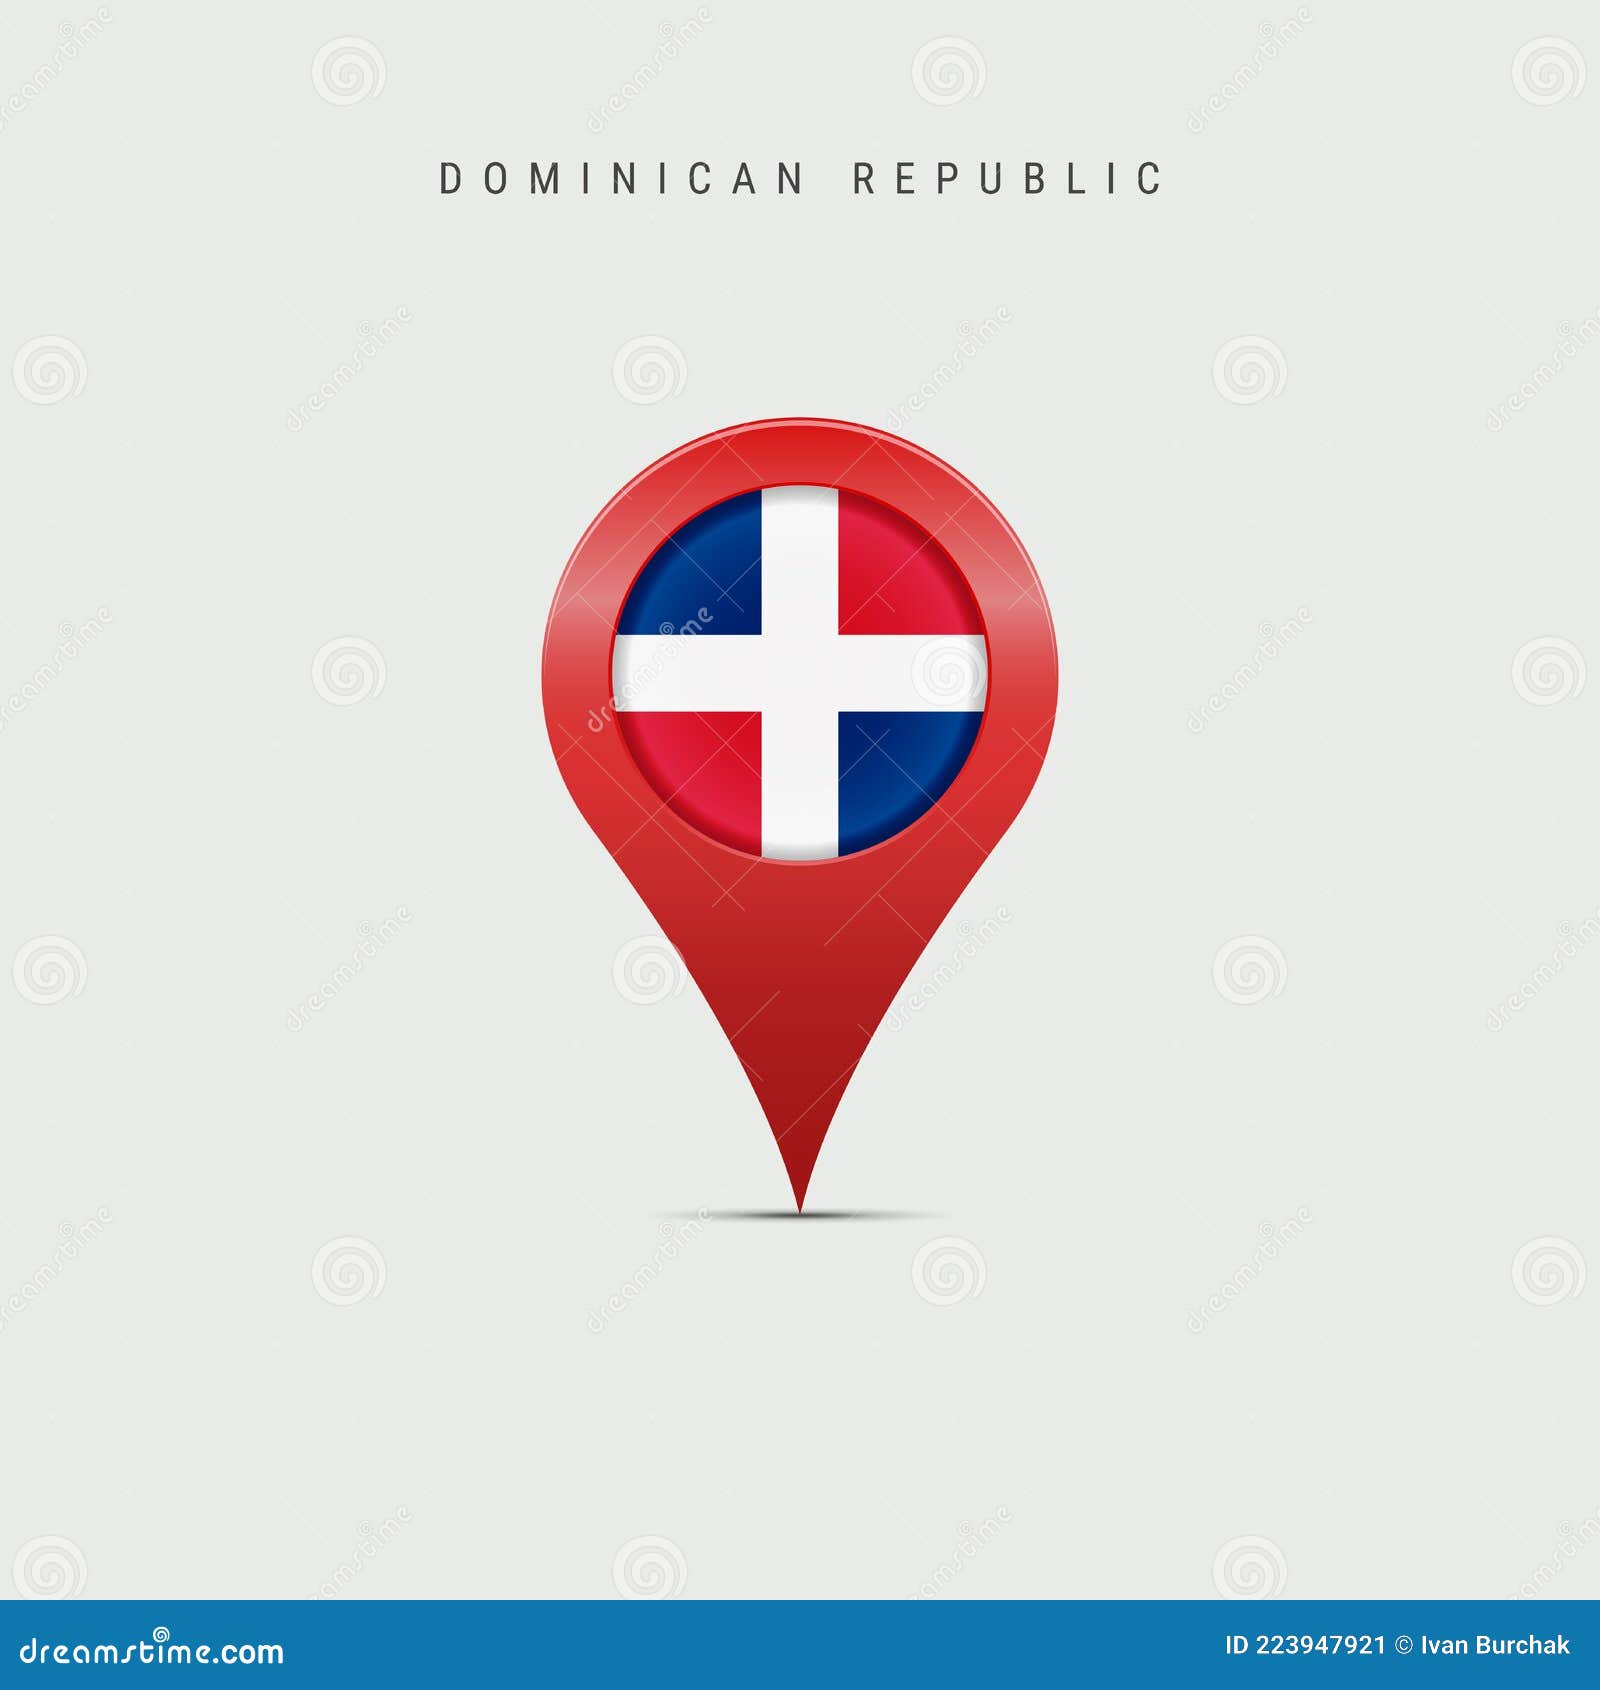 teardrop map marker with flag of dominican republic.  